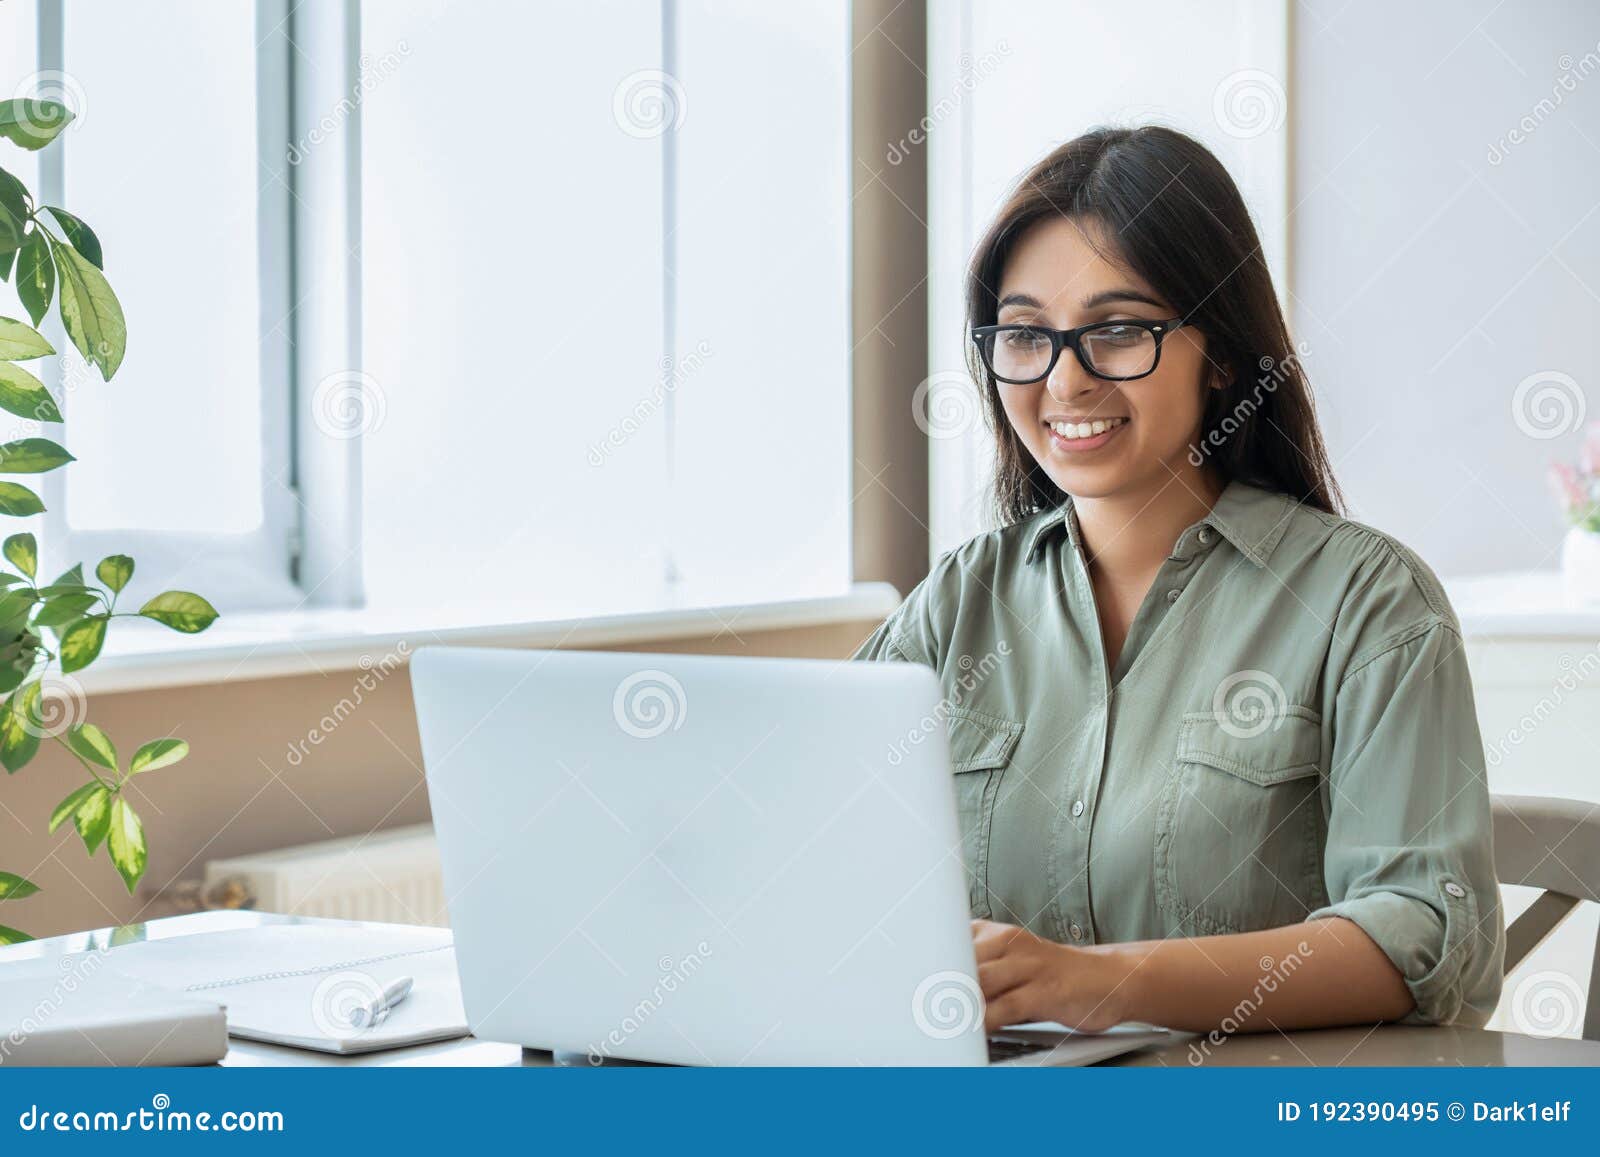 happy indian young woman using laptop computer work study at home office.